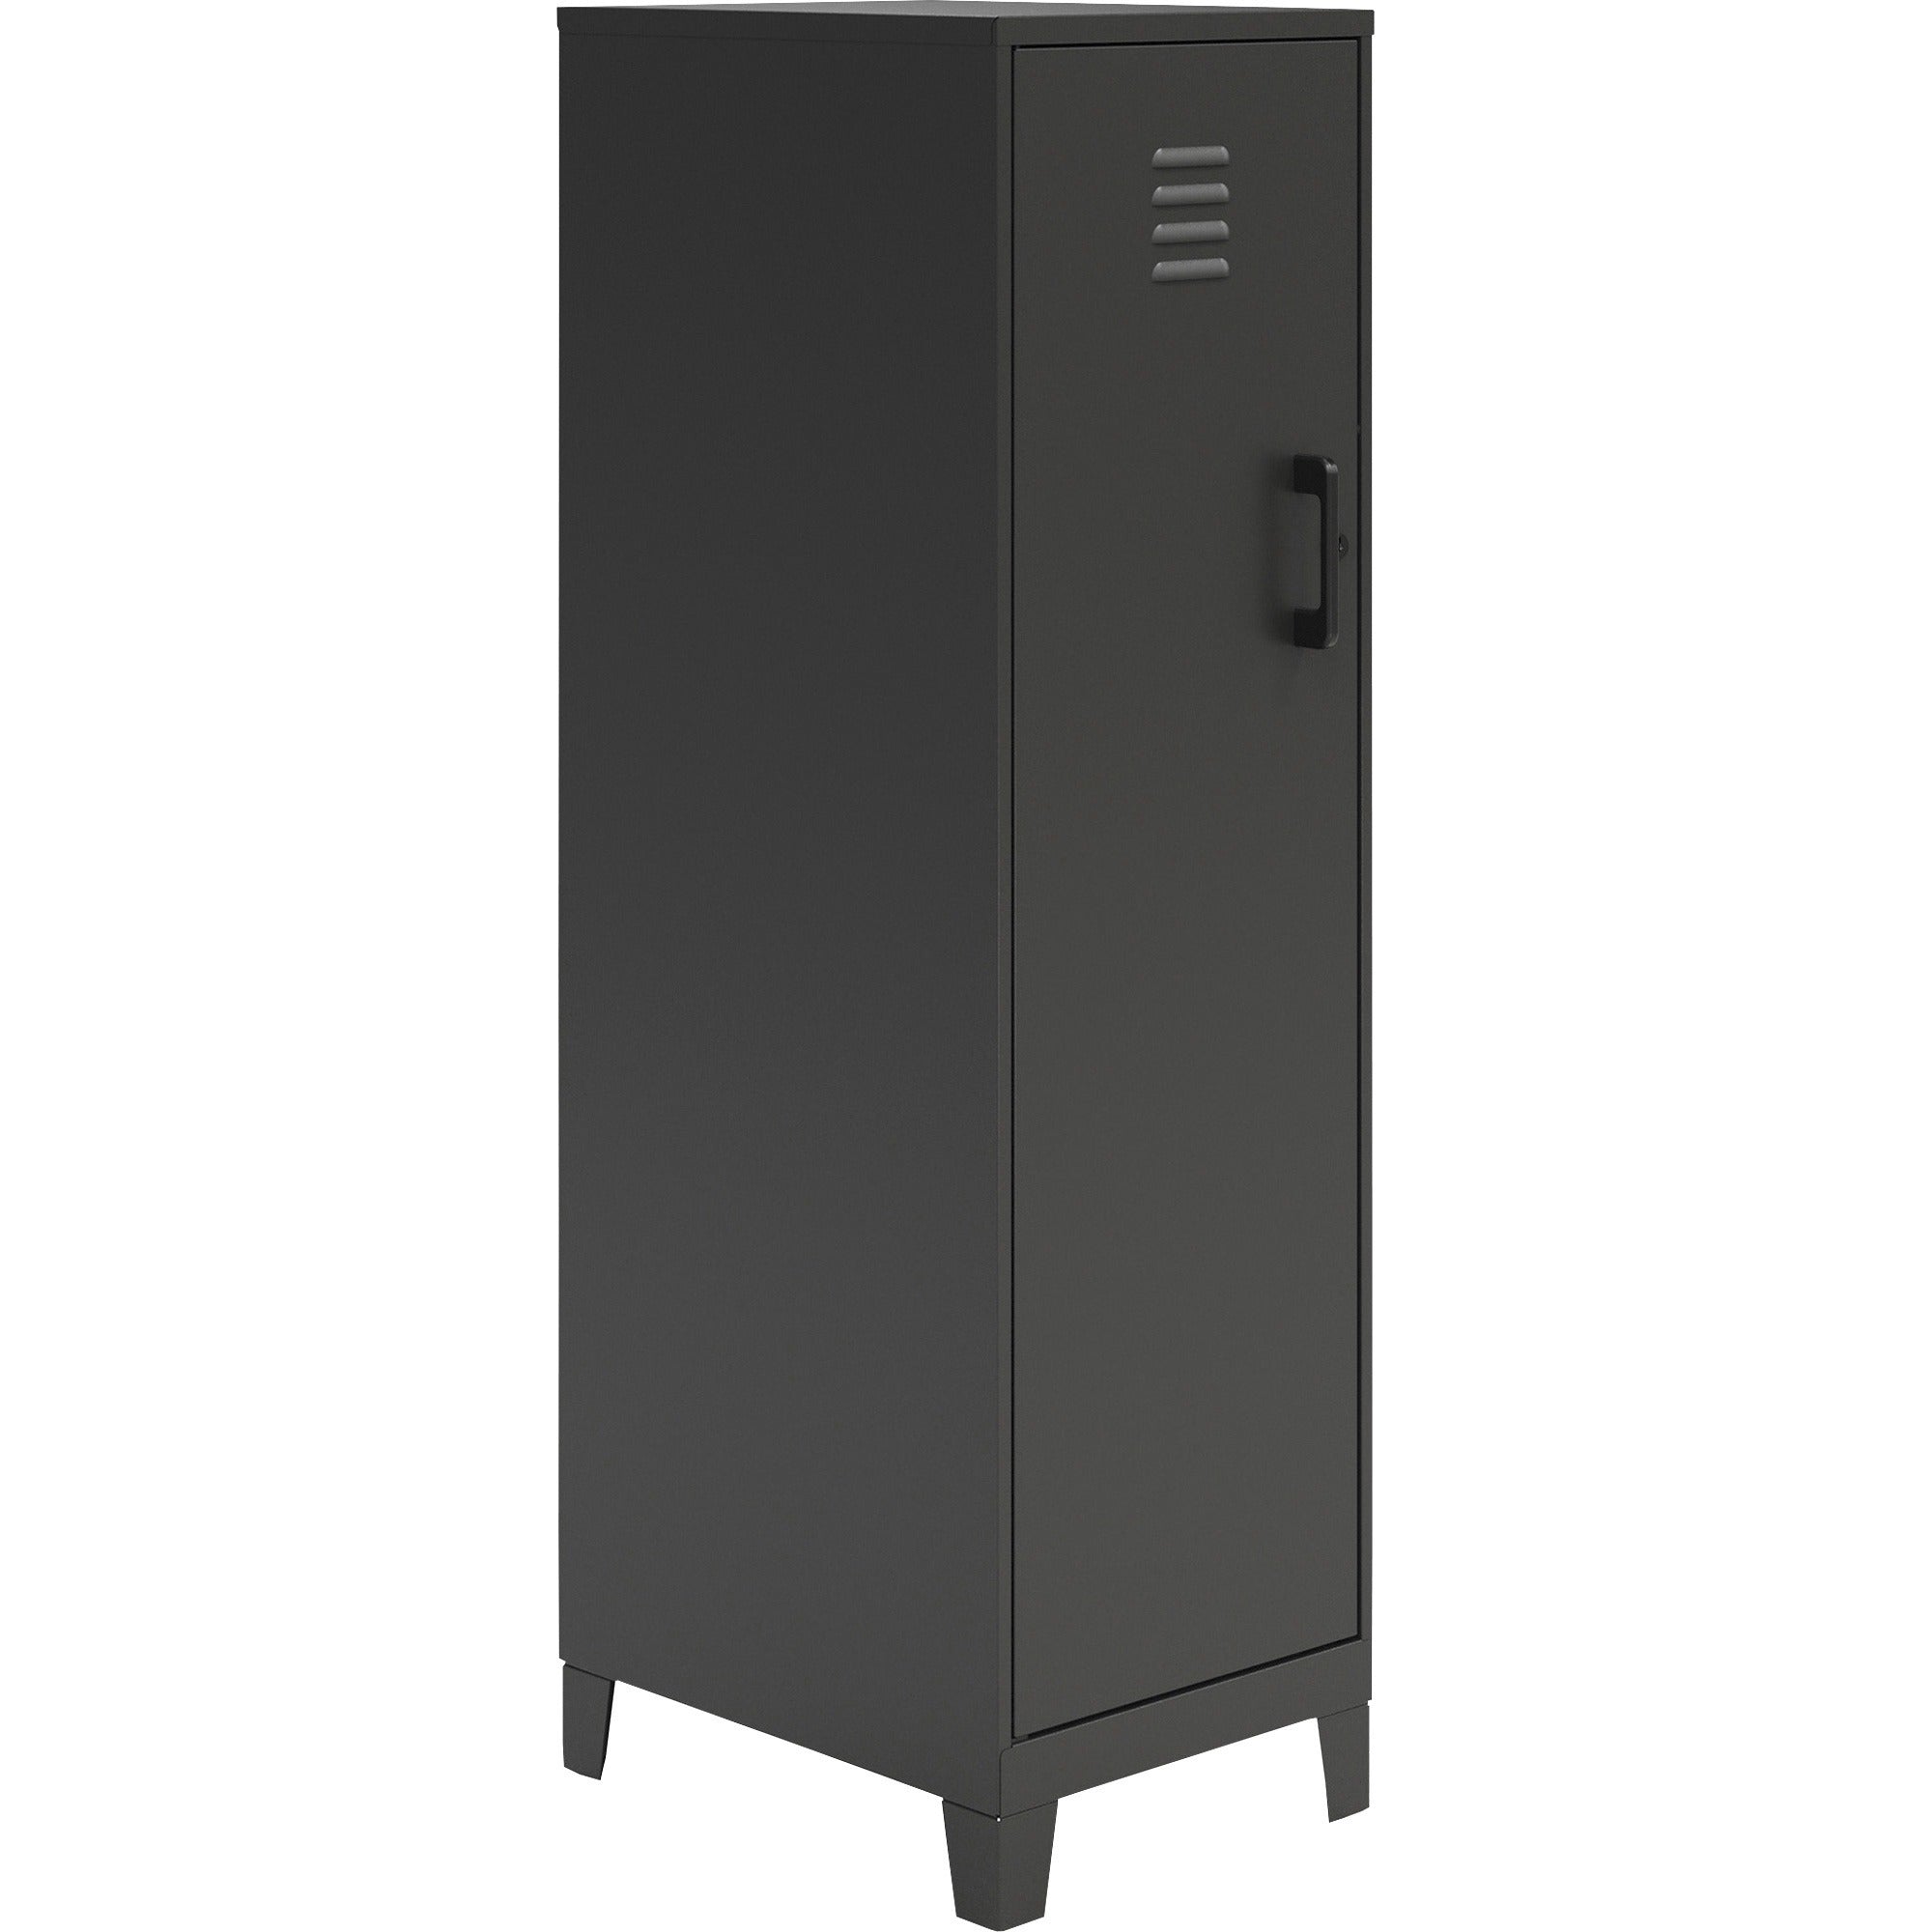 nusparc-personal-locker-4-shelves-for-office-home-sport-equipments-toy-game-classroom-playroom-basement-garage-overall-size-533-x-142-x-18-black-steel-taa-compliant_nprsl418zzbk - 1